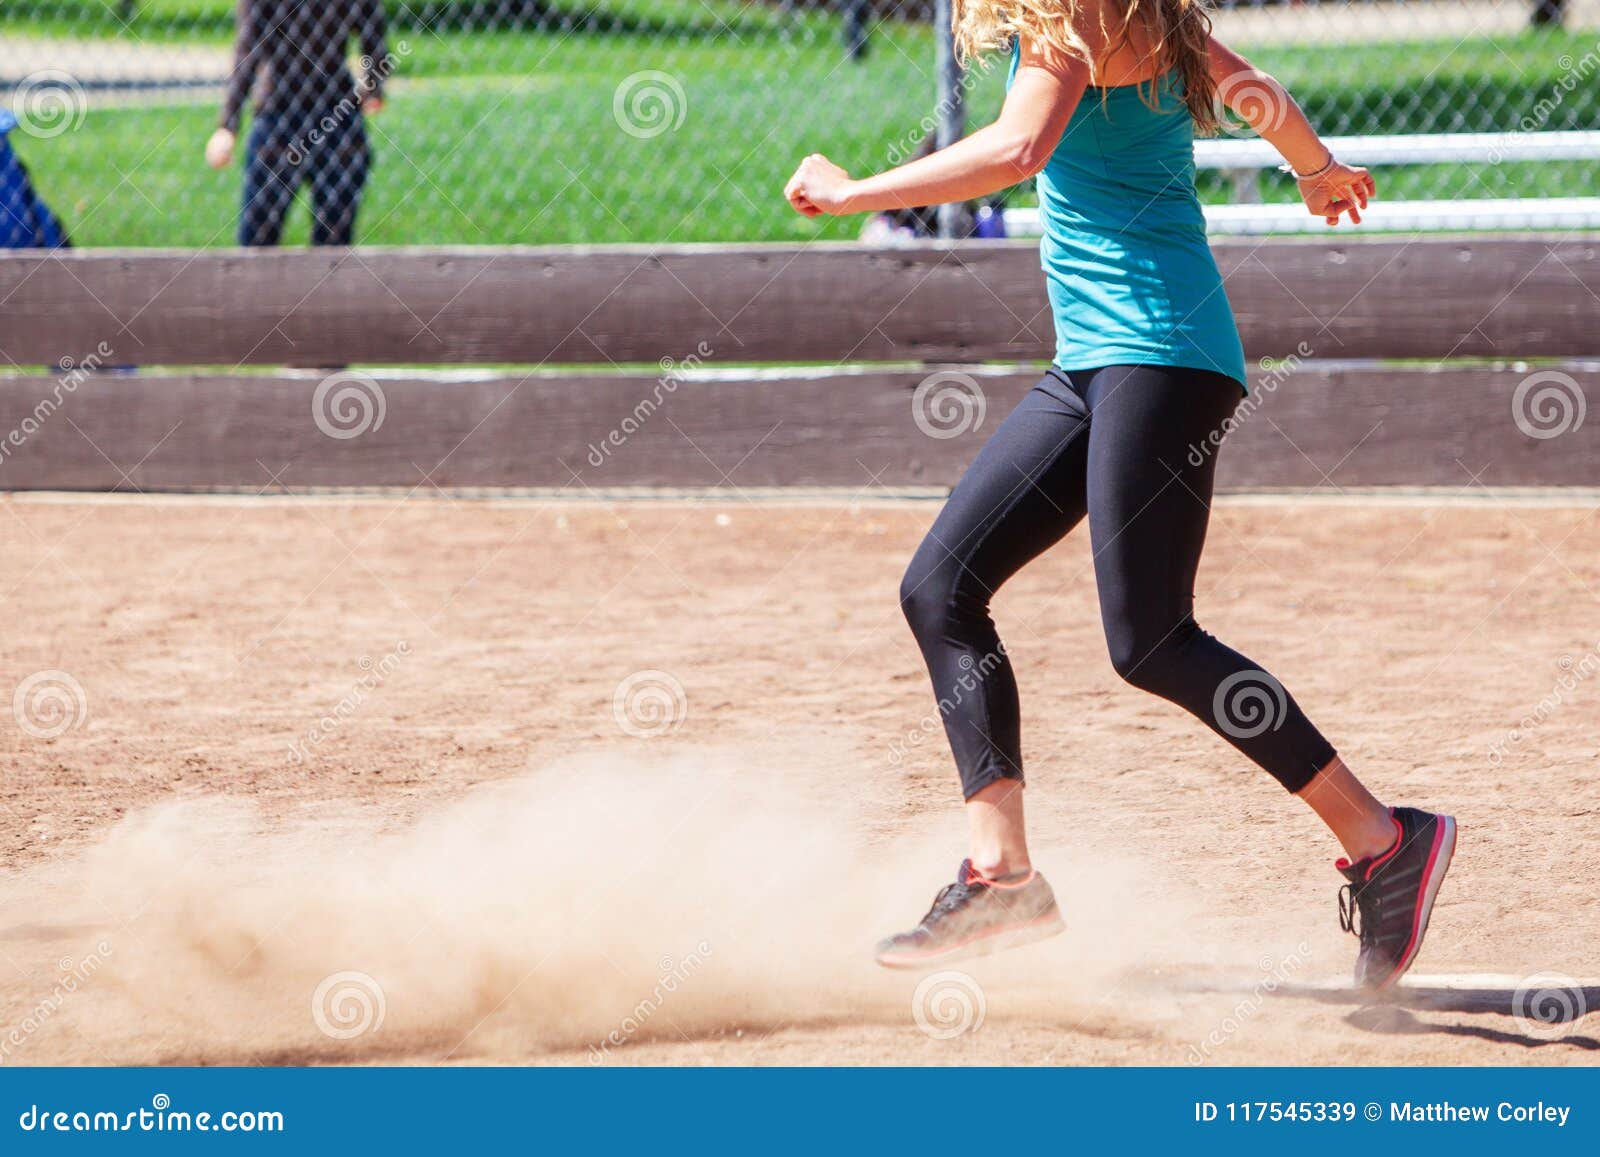 a woman plays a game of kickball